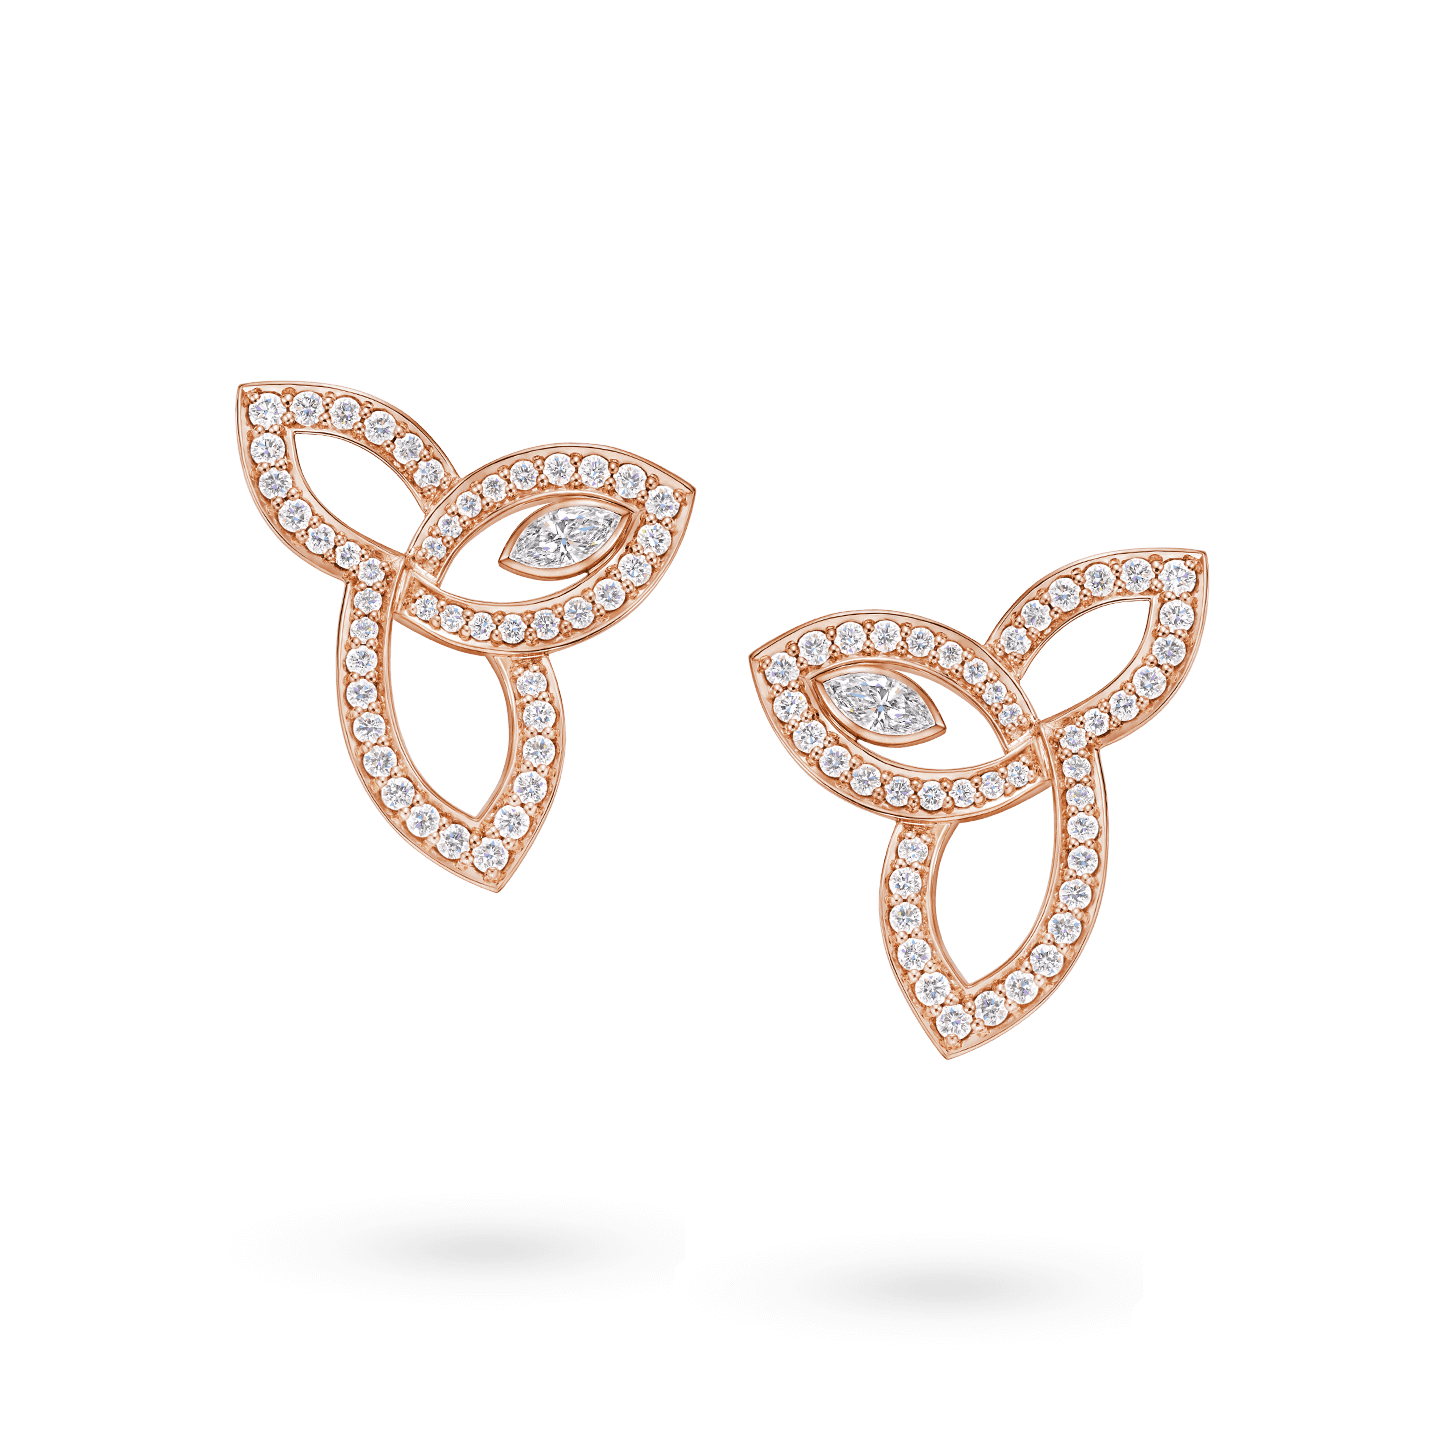 Lily Cluster Diamond Earrings in Rose Gold, Product Image 1